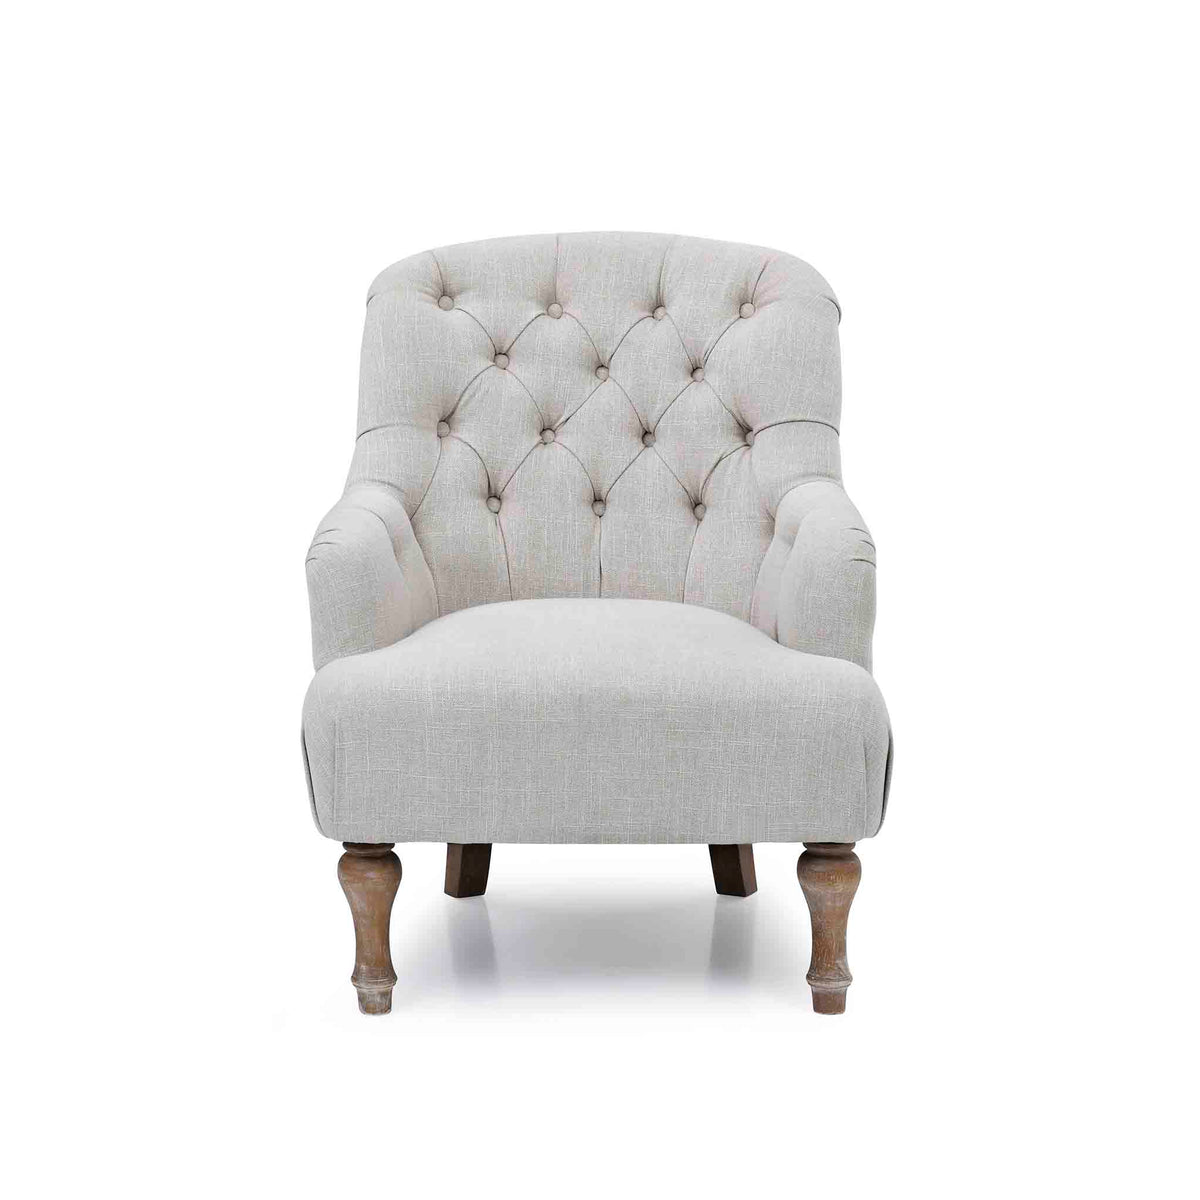 front view of the Cream Linen Fabric Bianca Armchair